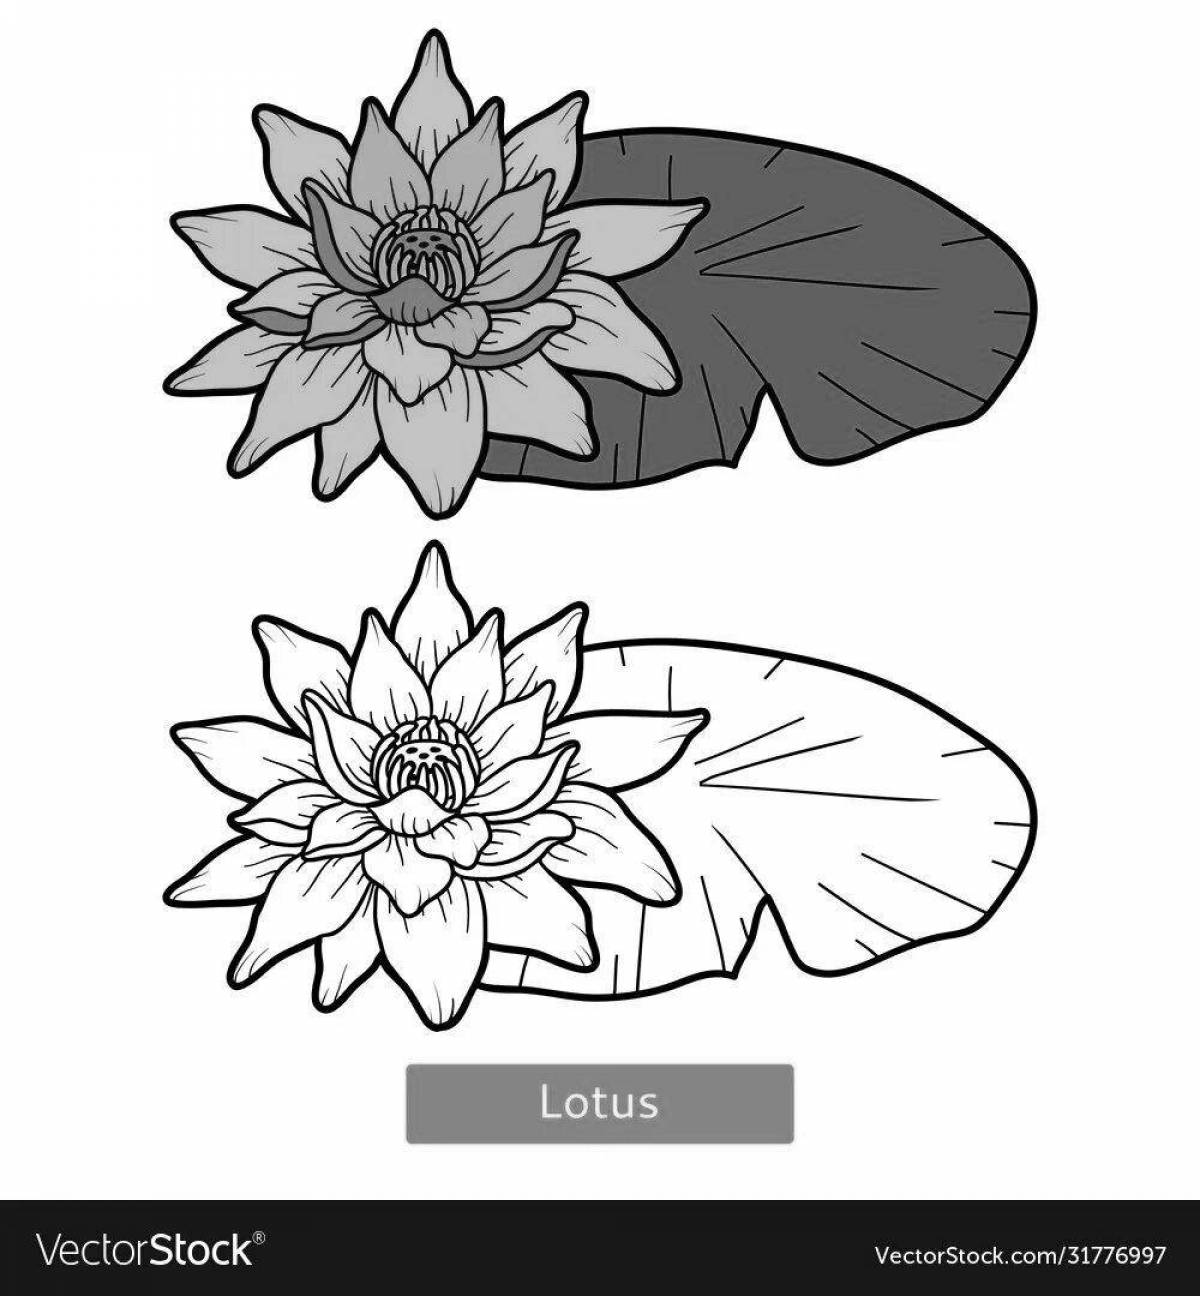 Coloring lotus blossom for children